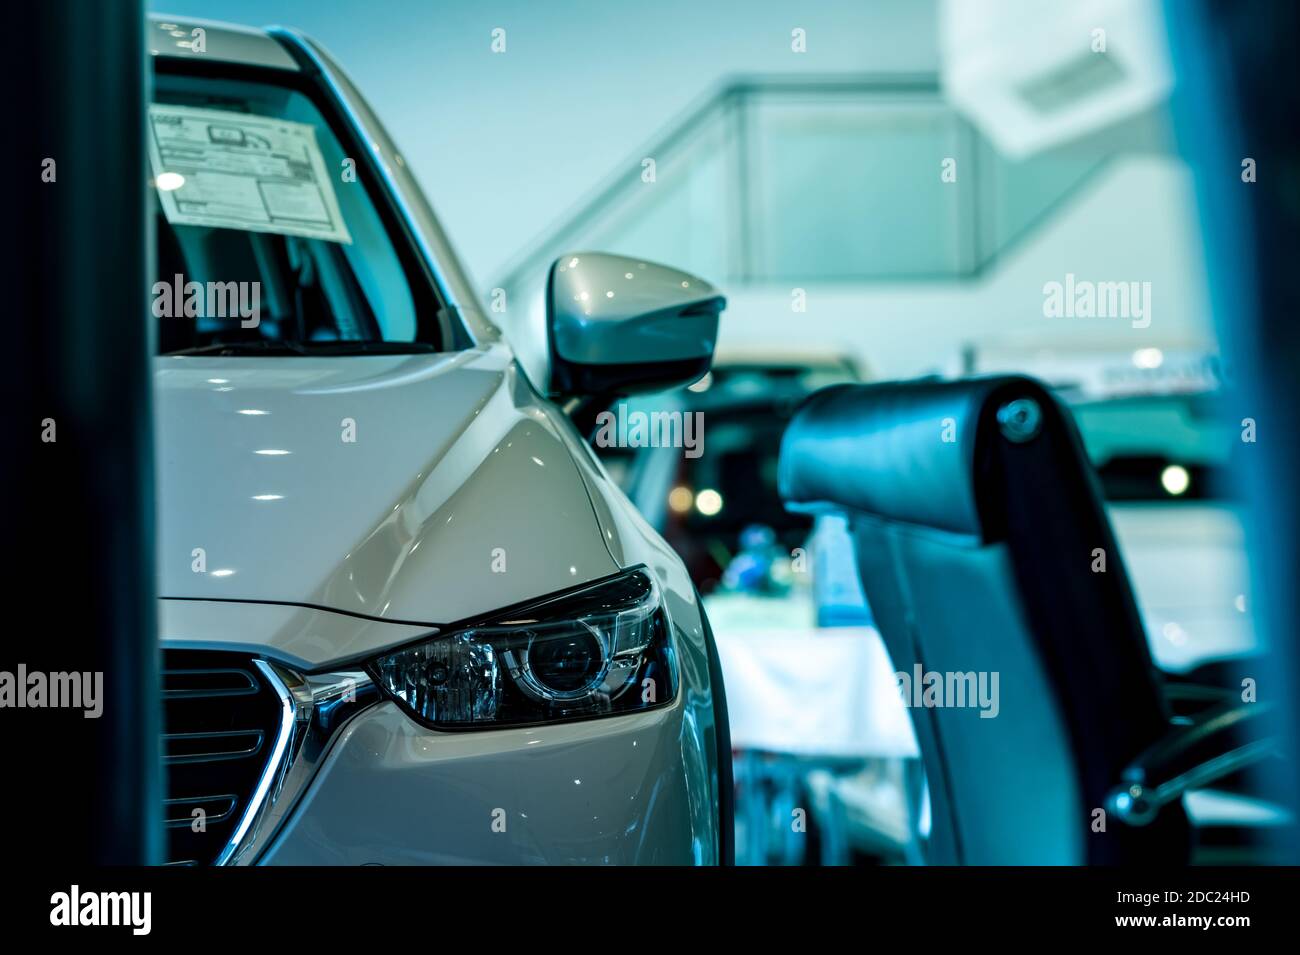 Selective focus on headlamp of white shiny car parked in showroom. Front view of new car in modern showroom for sale. Car dealership concept. Electric vehicle business concept. Showroom interior. Stock Photo